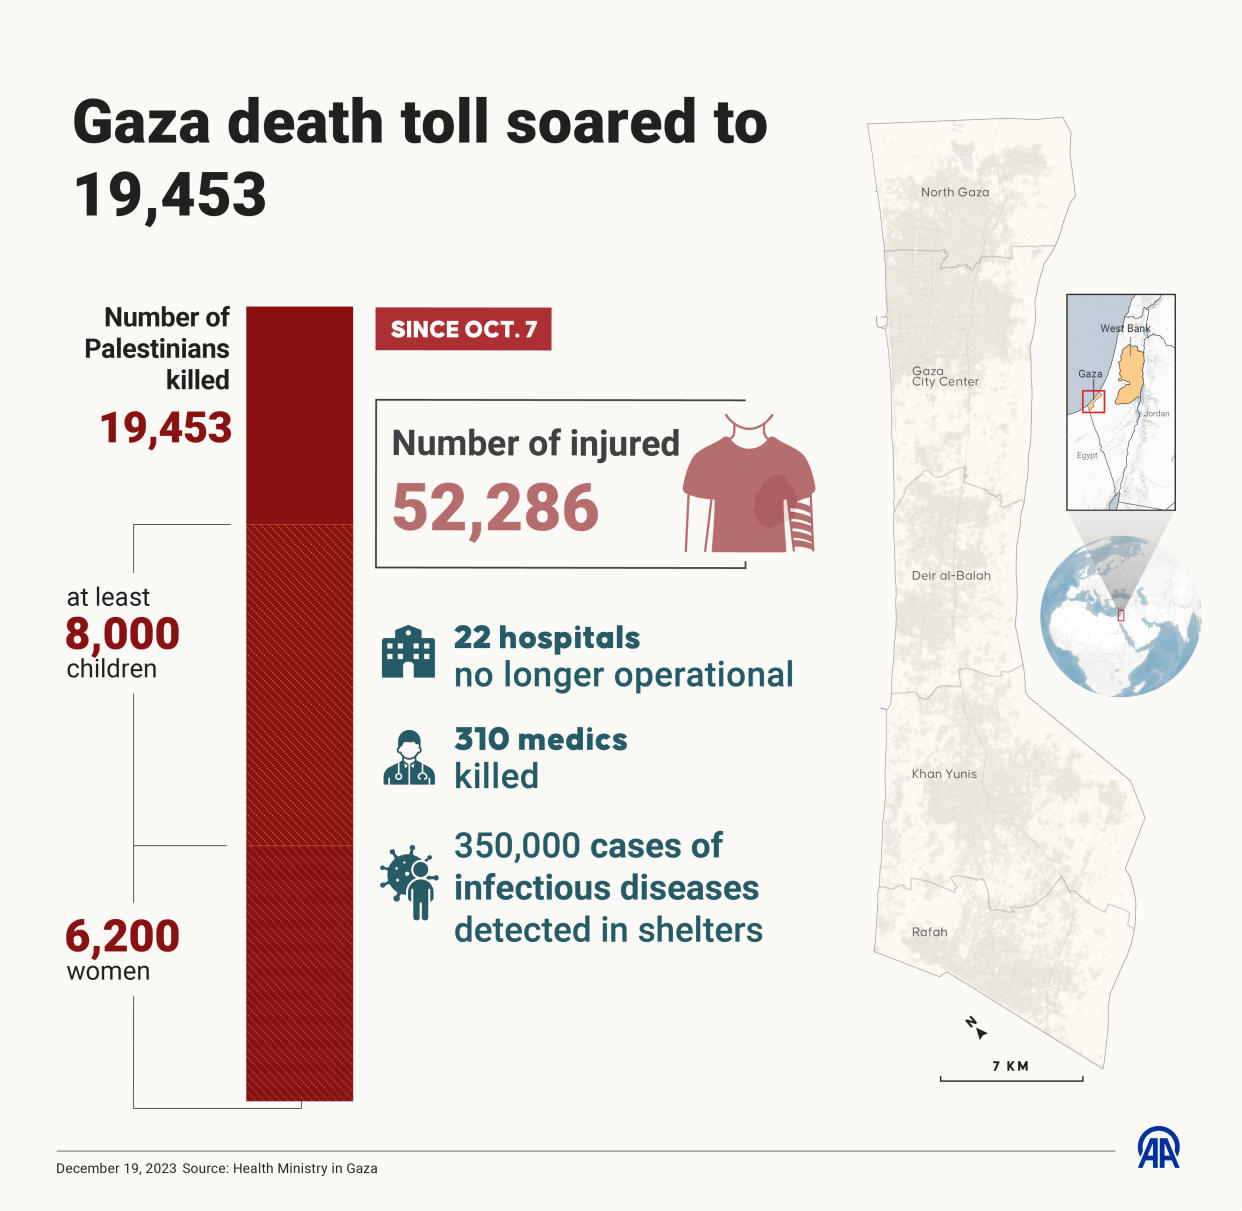 ANKARA, TURKIYE - DECEMBER 19: An infographic titled 'Gaza death toll soared to 19,453' created in Ankara, Turkiye on December 19, 2023. Death toll rose to 19,453 as Palestinian children and women casualties top 14,000. (Photo by Elif Acar/Anadolu via Getty Images)